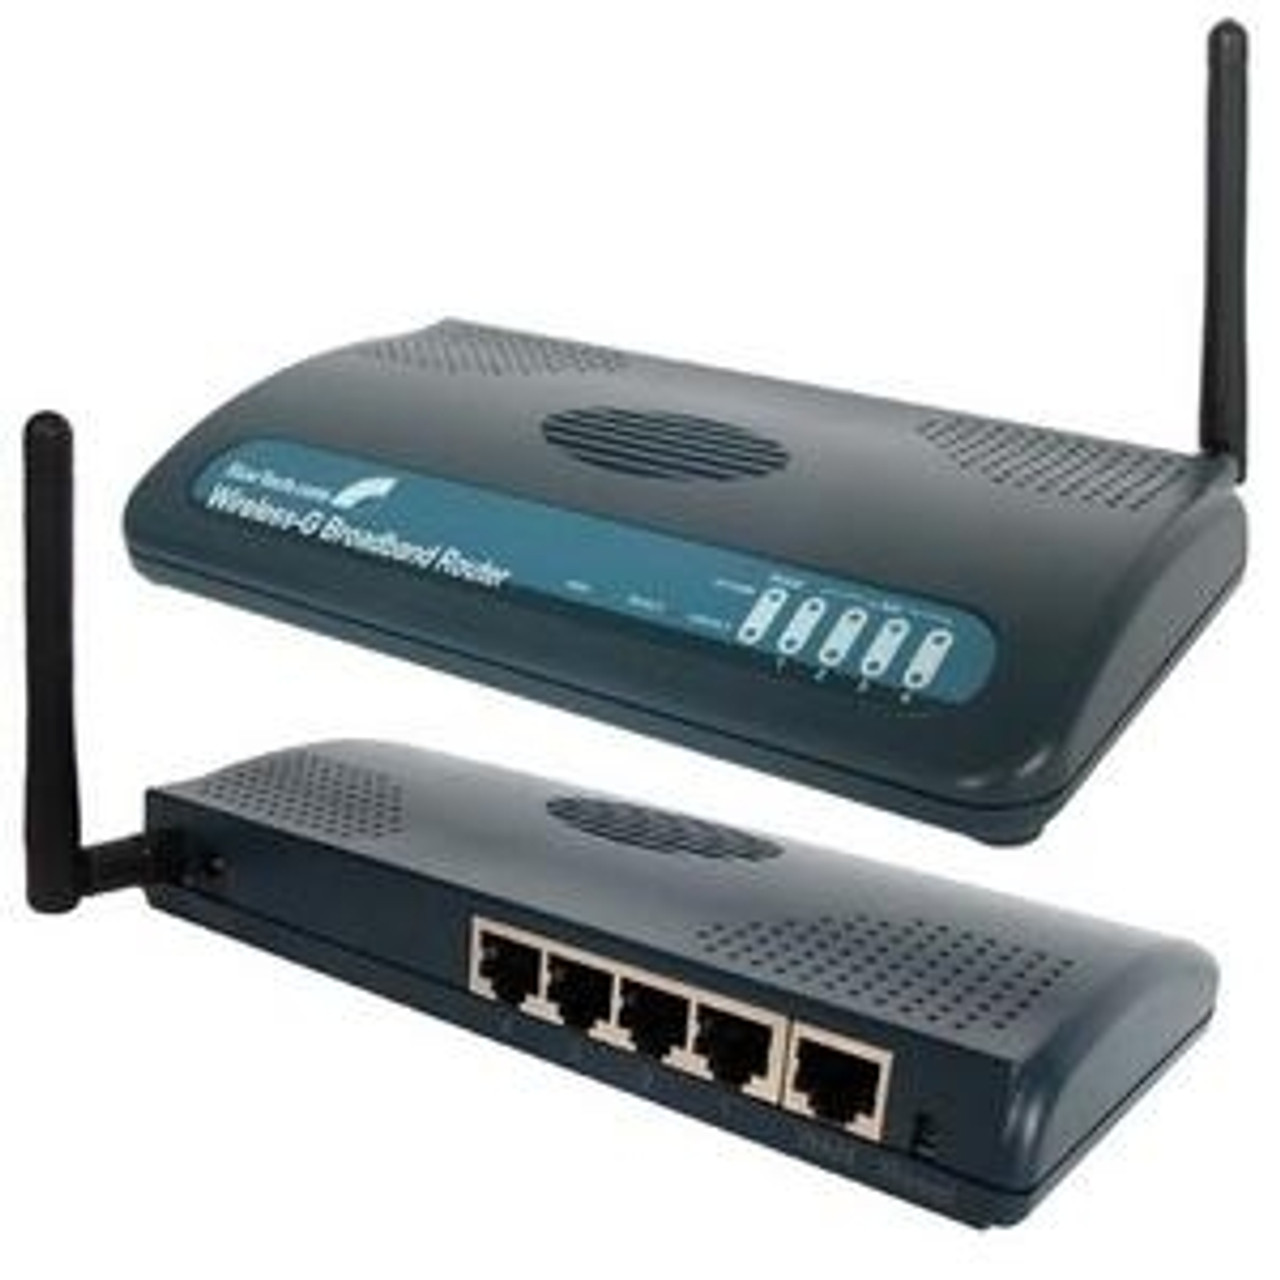 BR455GWDC StarTech 802.11g Wireless Cable/DSL router w. 4 port switch (Refurbished)